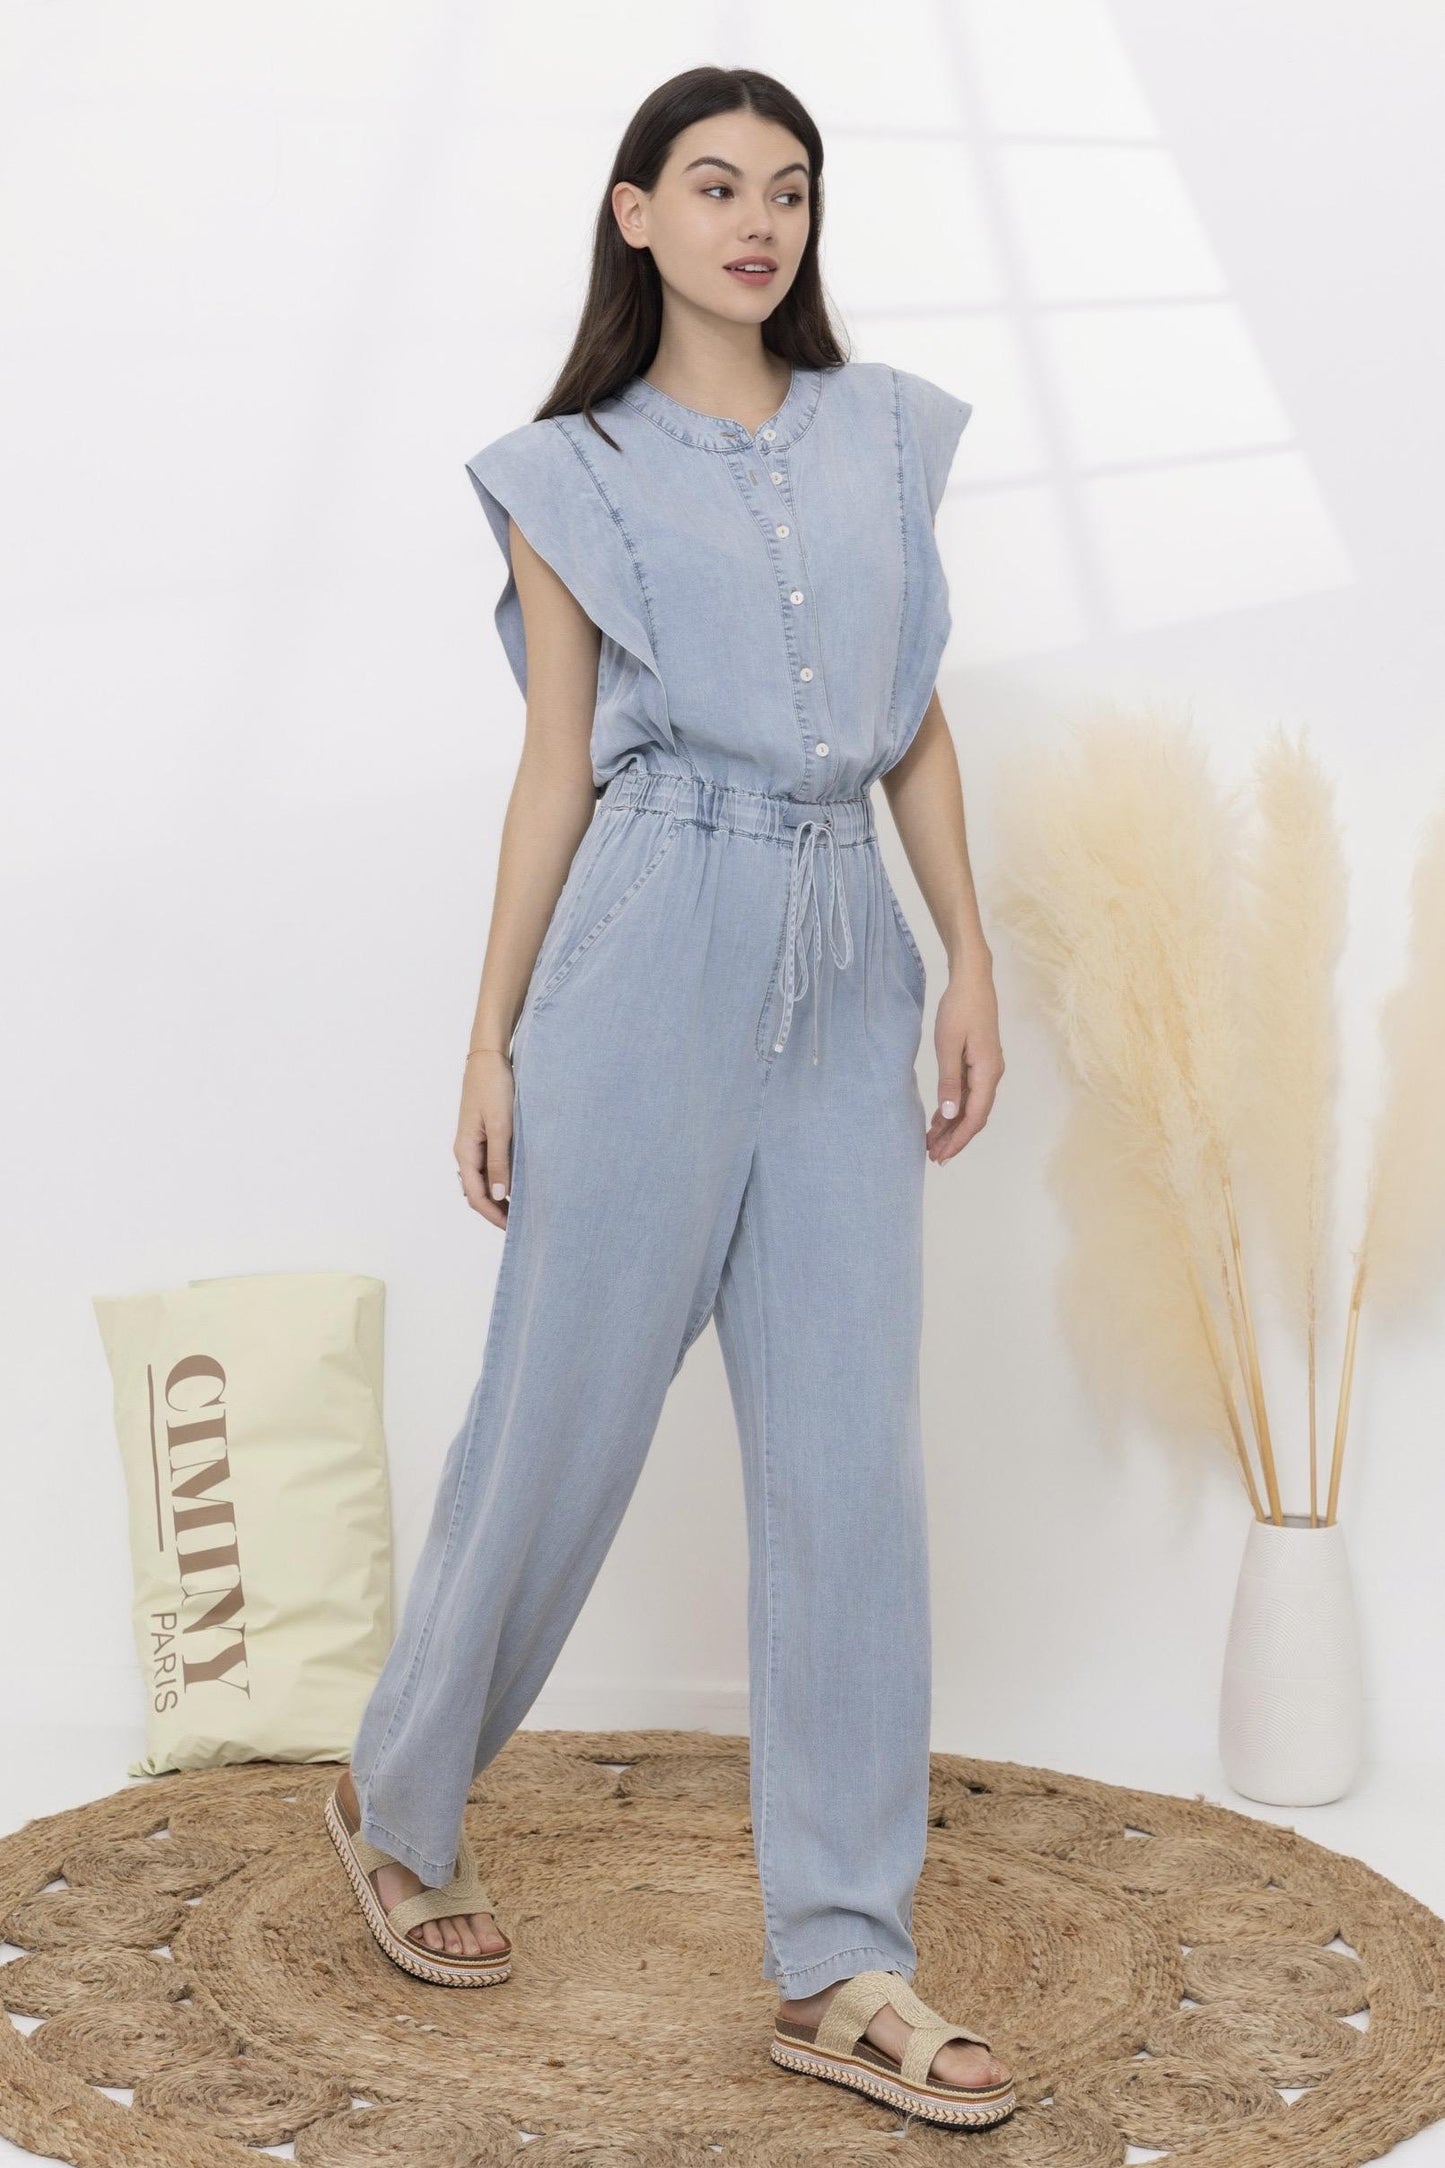 Lilly washed blue jumpsuit